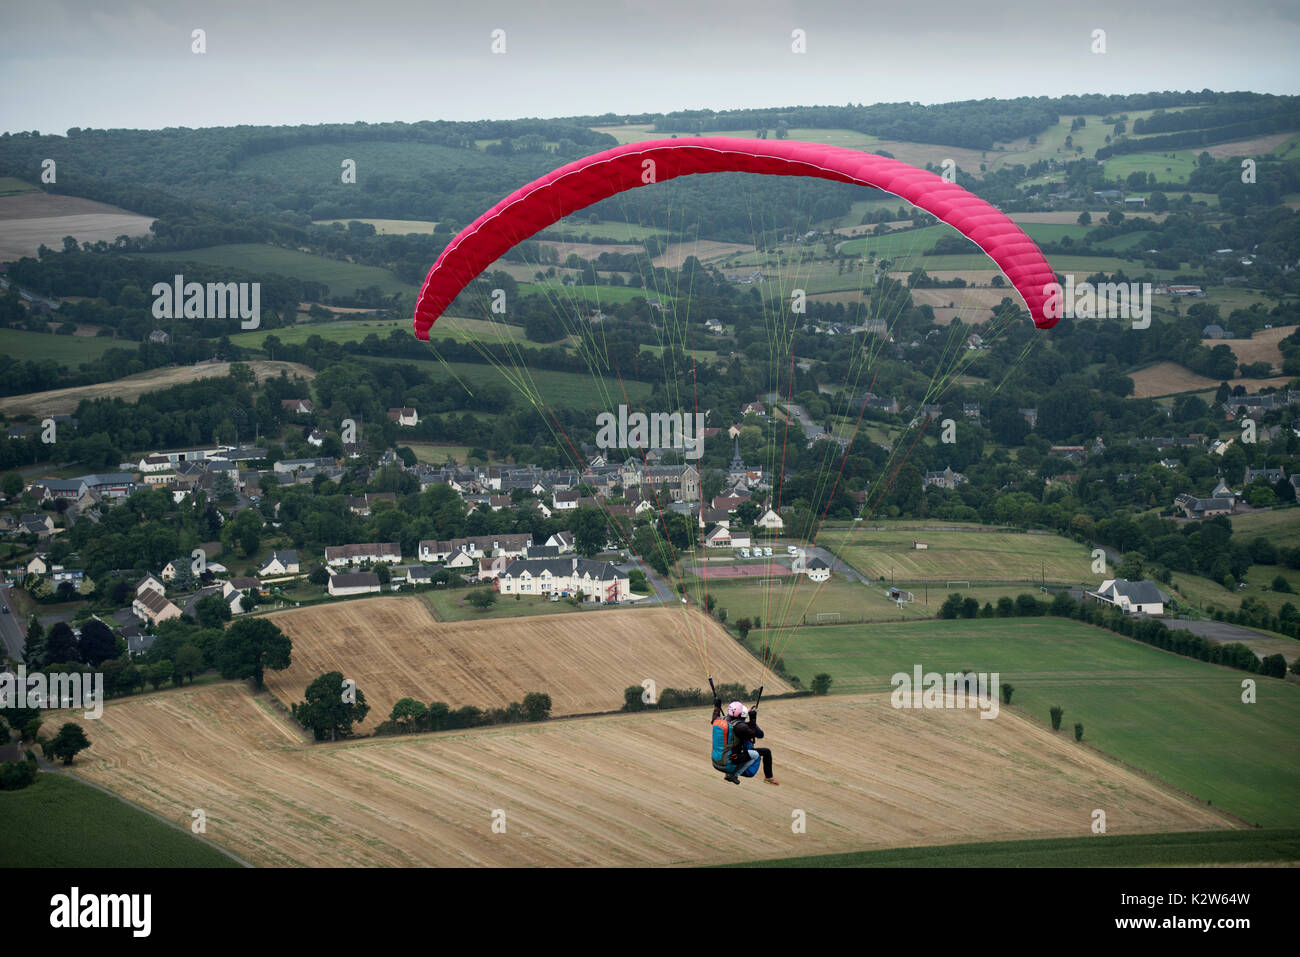 Suisse Normande, Swiss Normandy above Clecy France. August 2017 Paragliding from the Rochers de la Houle above Clecy and the Orne River near Le Pain d Stock Photo